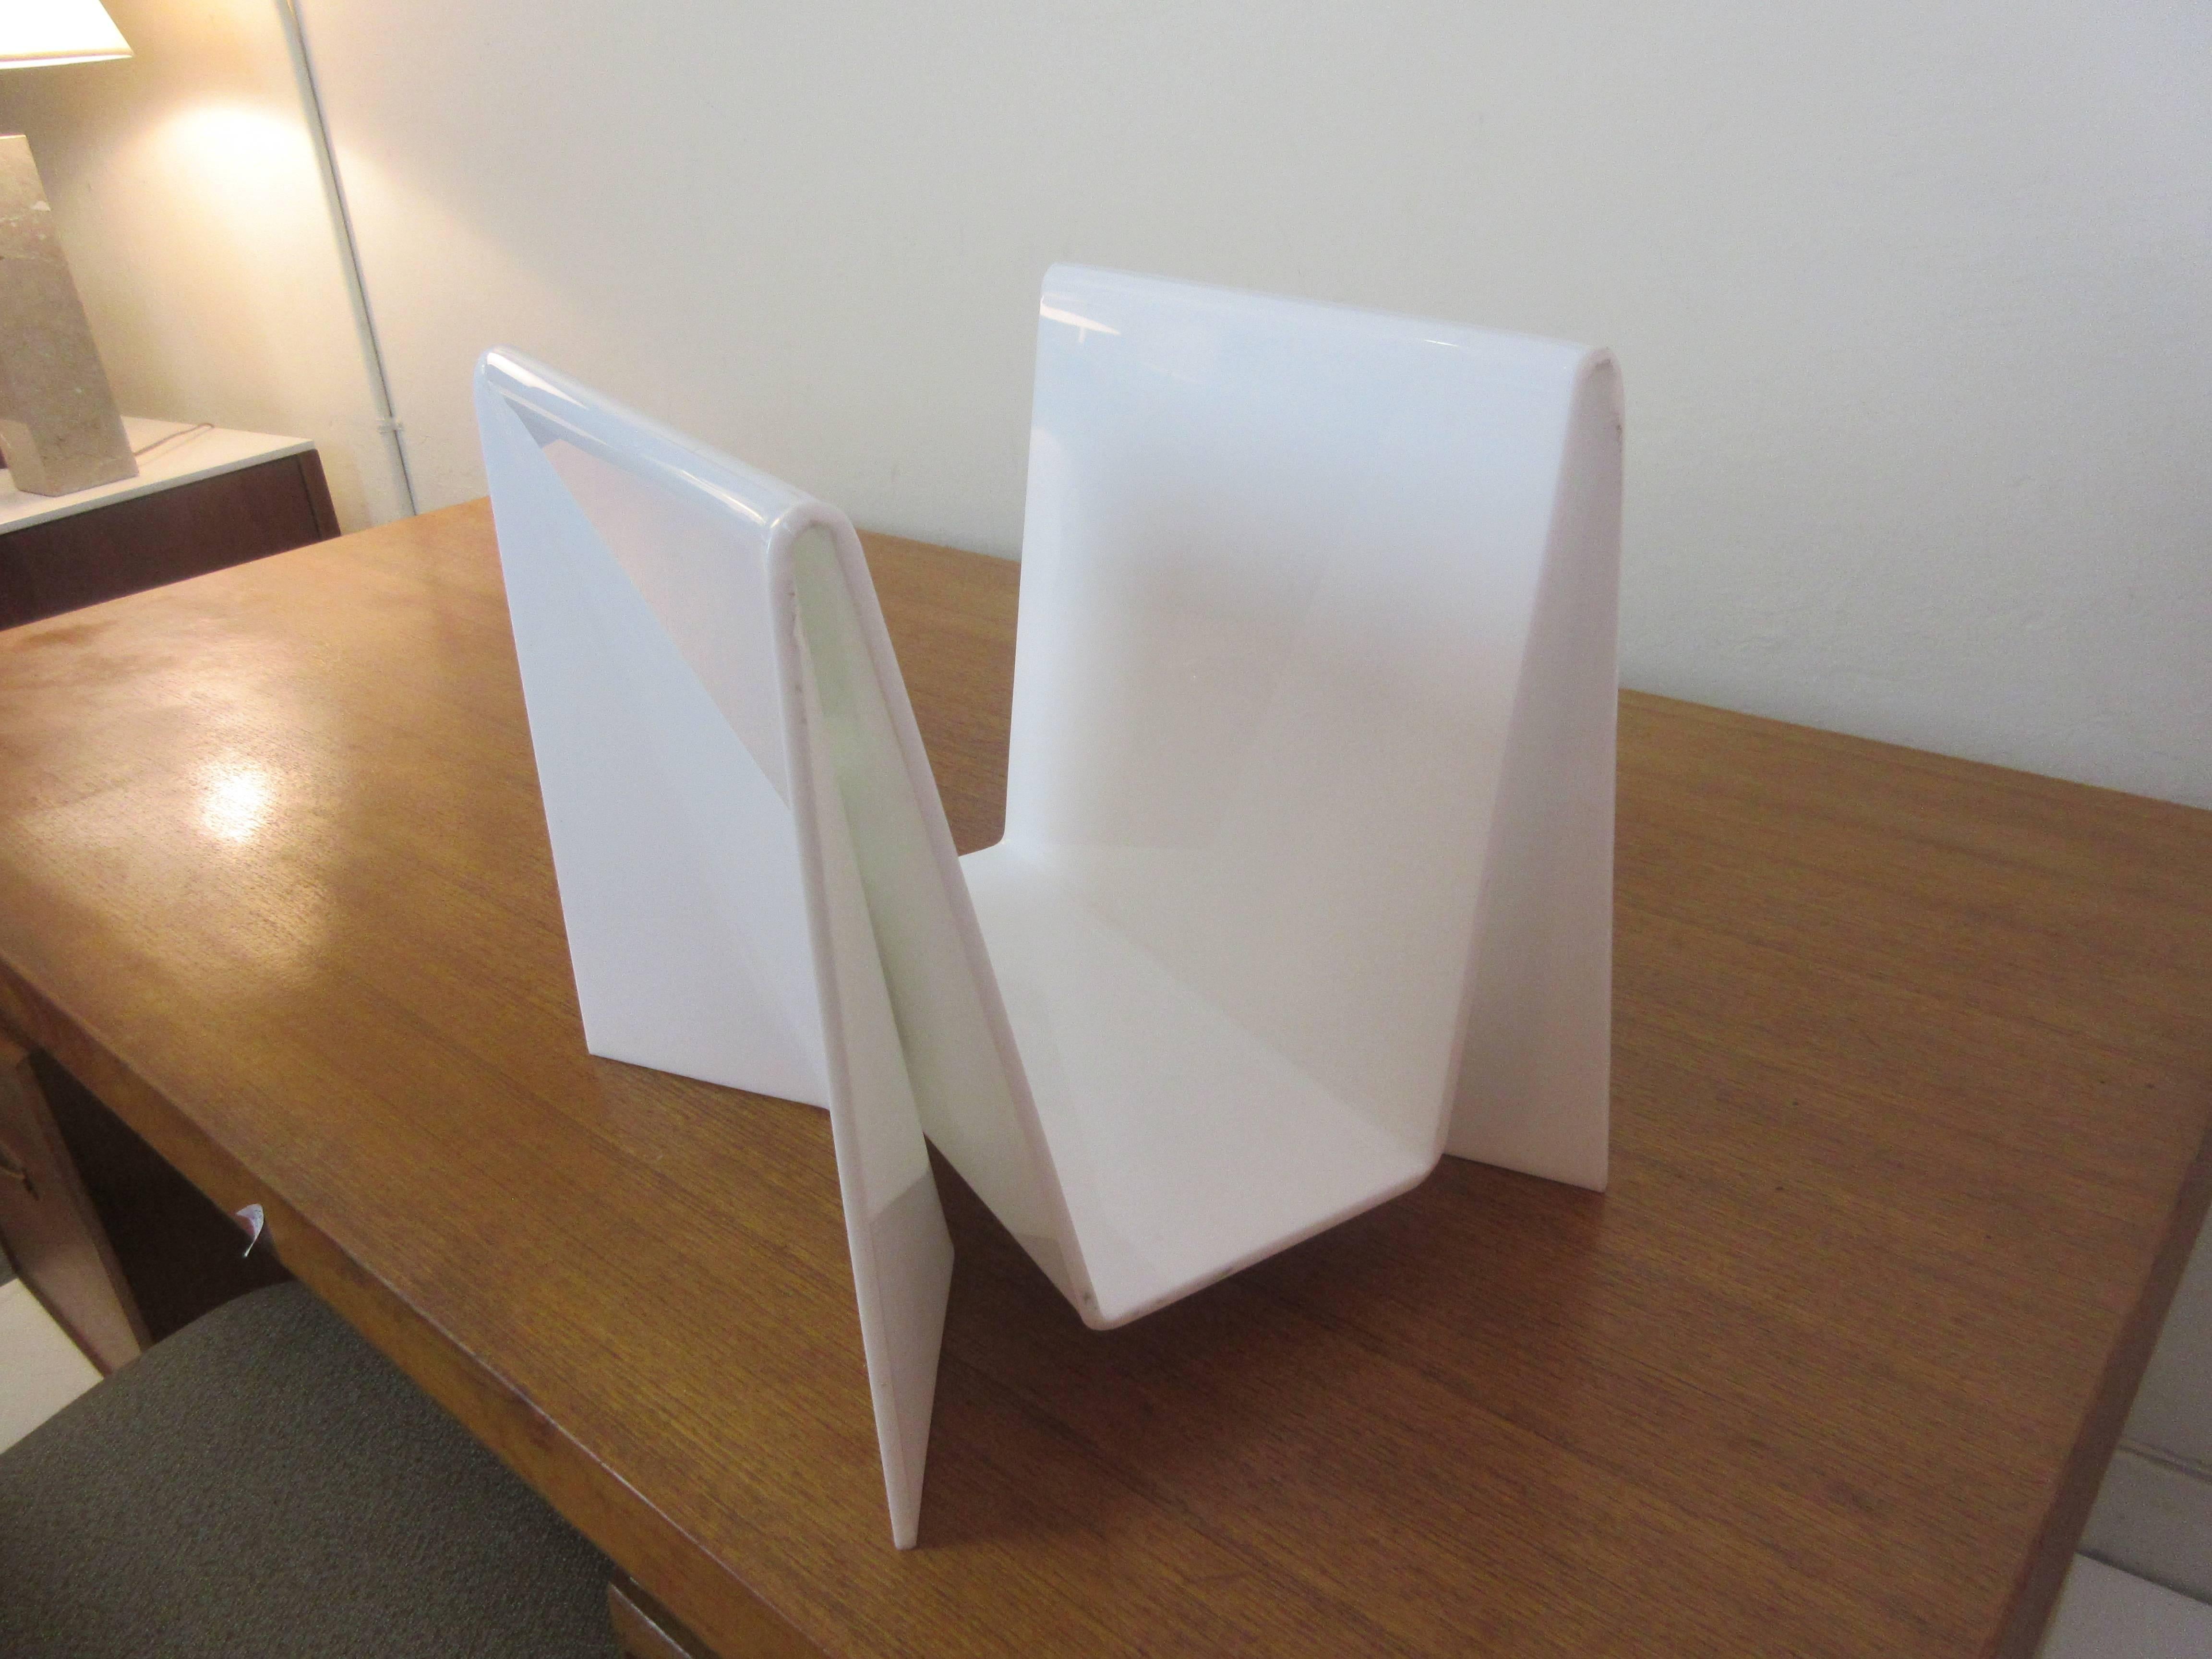 Neal Small white acrylic orgami series magazine rack consisting of planes of rectangles and diamond shapes.